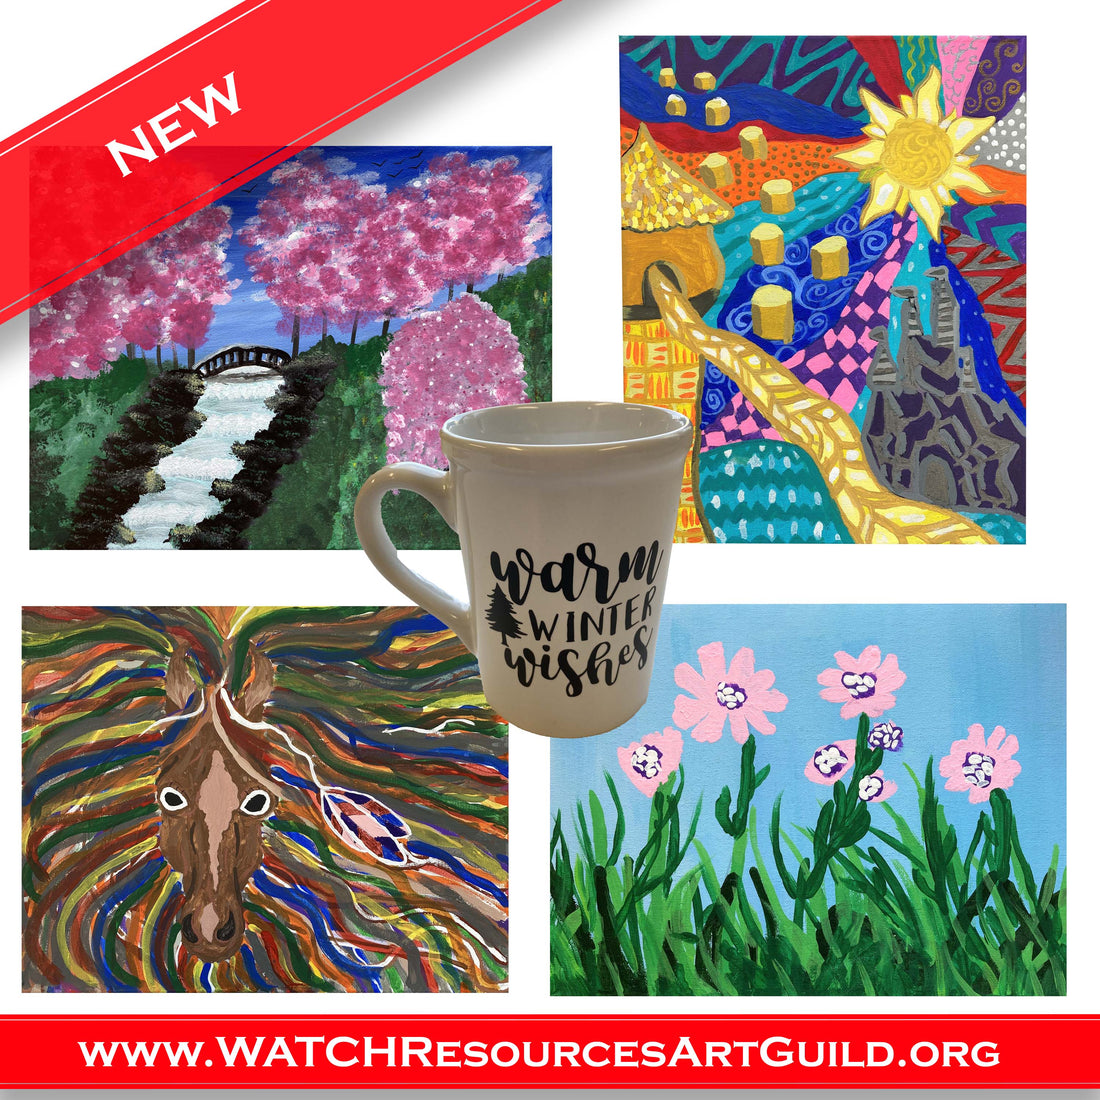 WATCH Resources Art Guild - January 2022